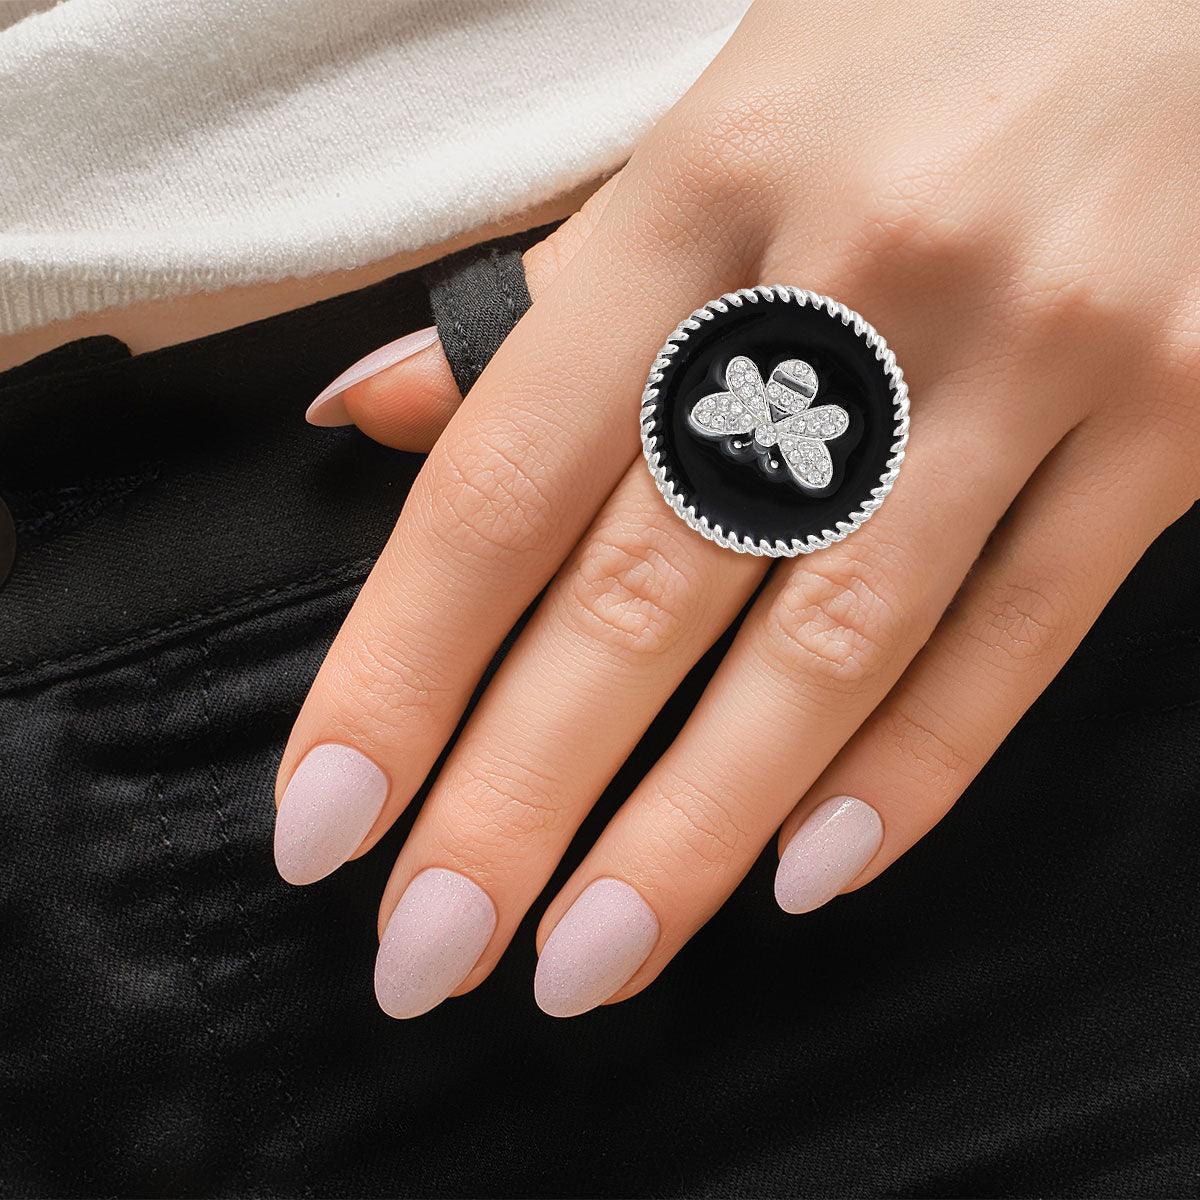 Buzz-Worthy Style: Rock the Black Medallion Cocktail Ring - Fashion Jewelry